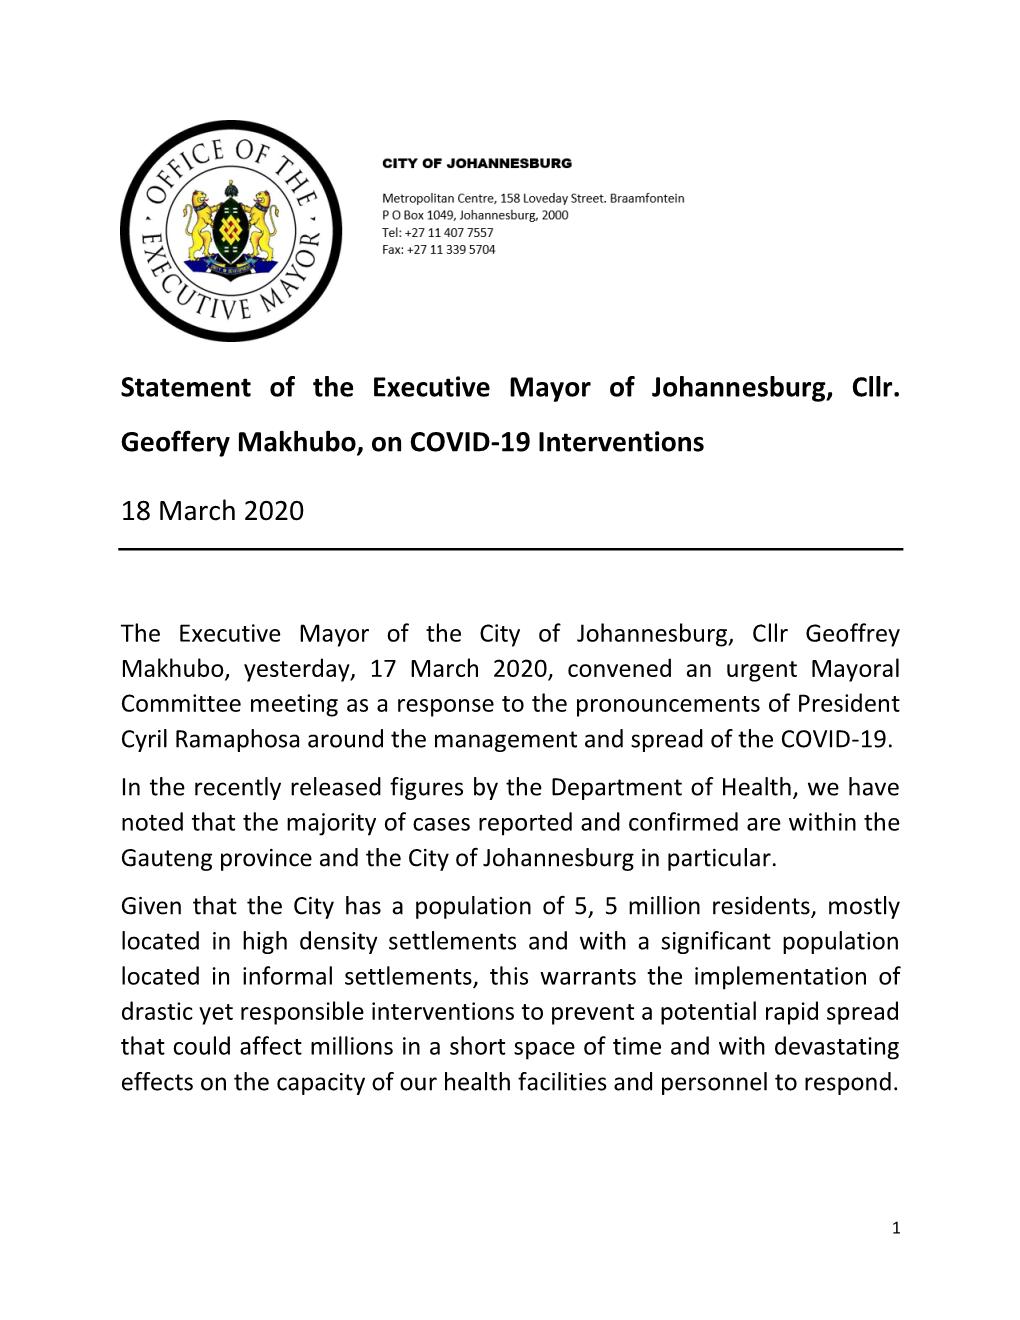 Statement of the Executive Mayor of Johannesburg, Cllr. Geoffery Makhubo, on COVID-19 Interventions